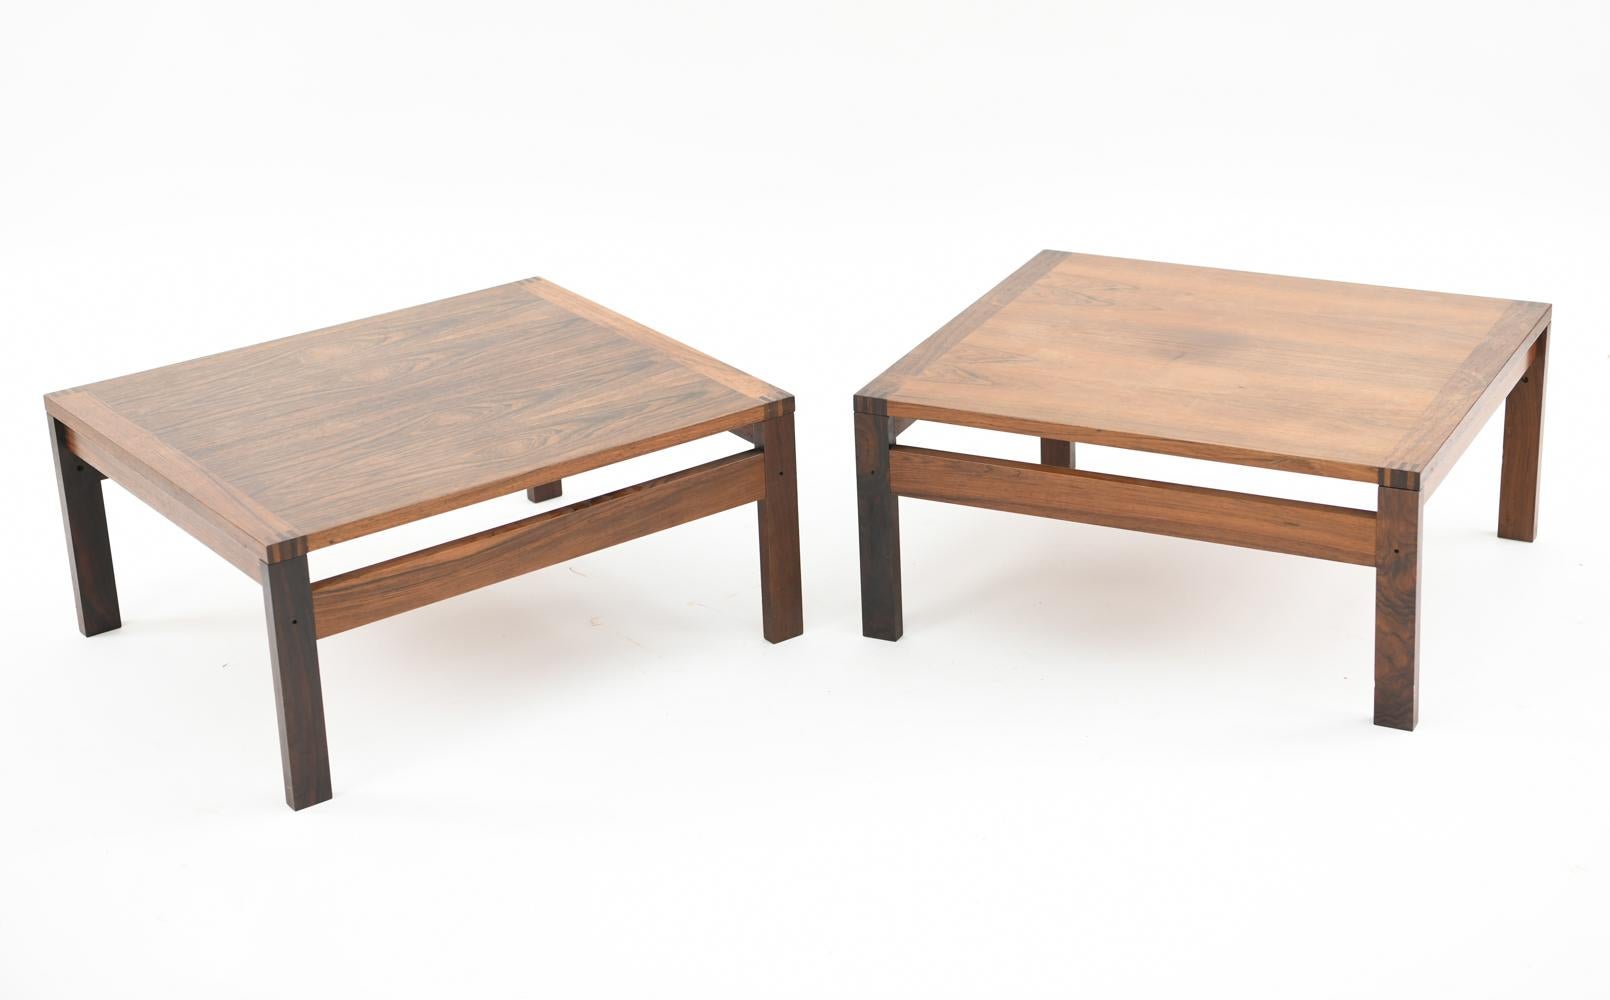 A gorgeous pair of rosewood side tables designed by Ole Gjerløv-Knudsen & Torben Lind for France & Son, circa 1960s. A great modular design for stand alone use or pairing with Gjerløv-Knudsen and Lind's other designs.